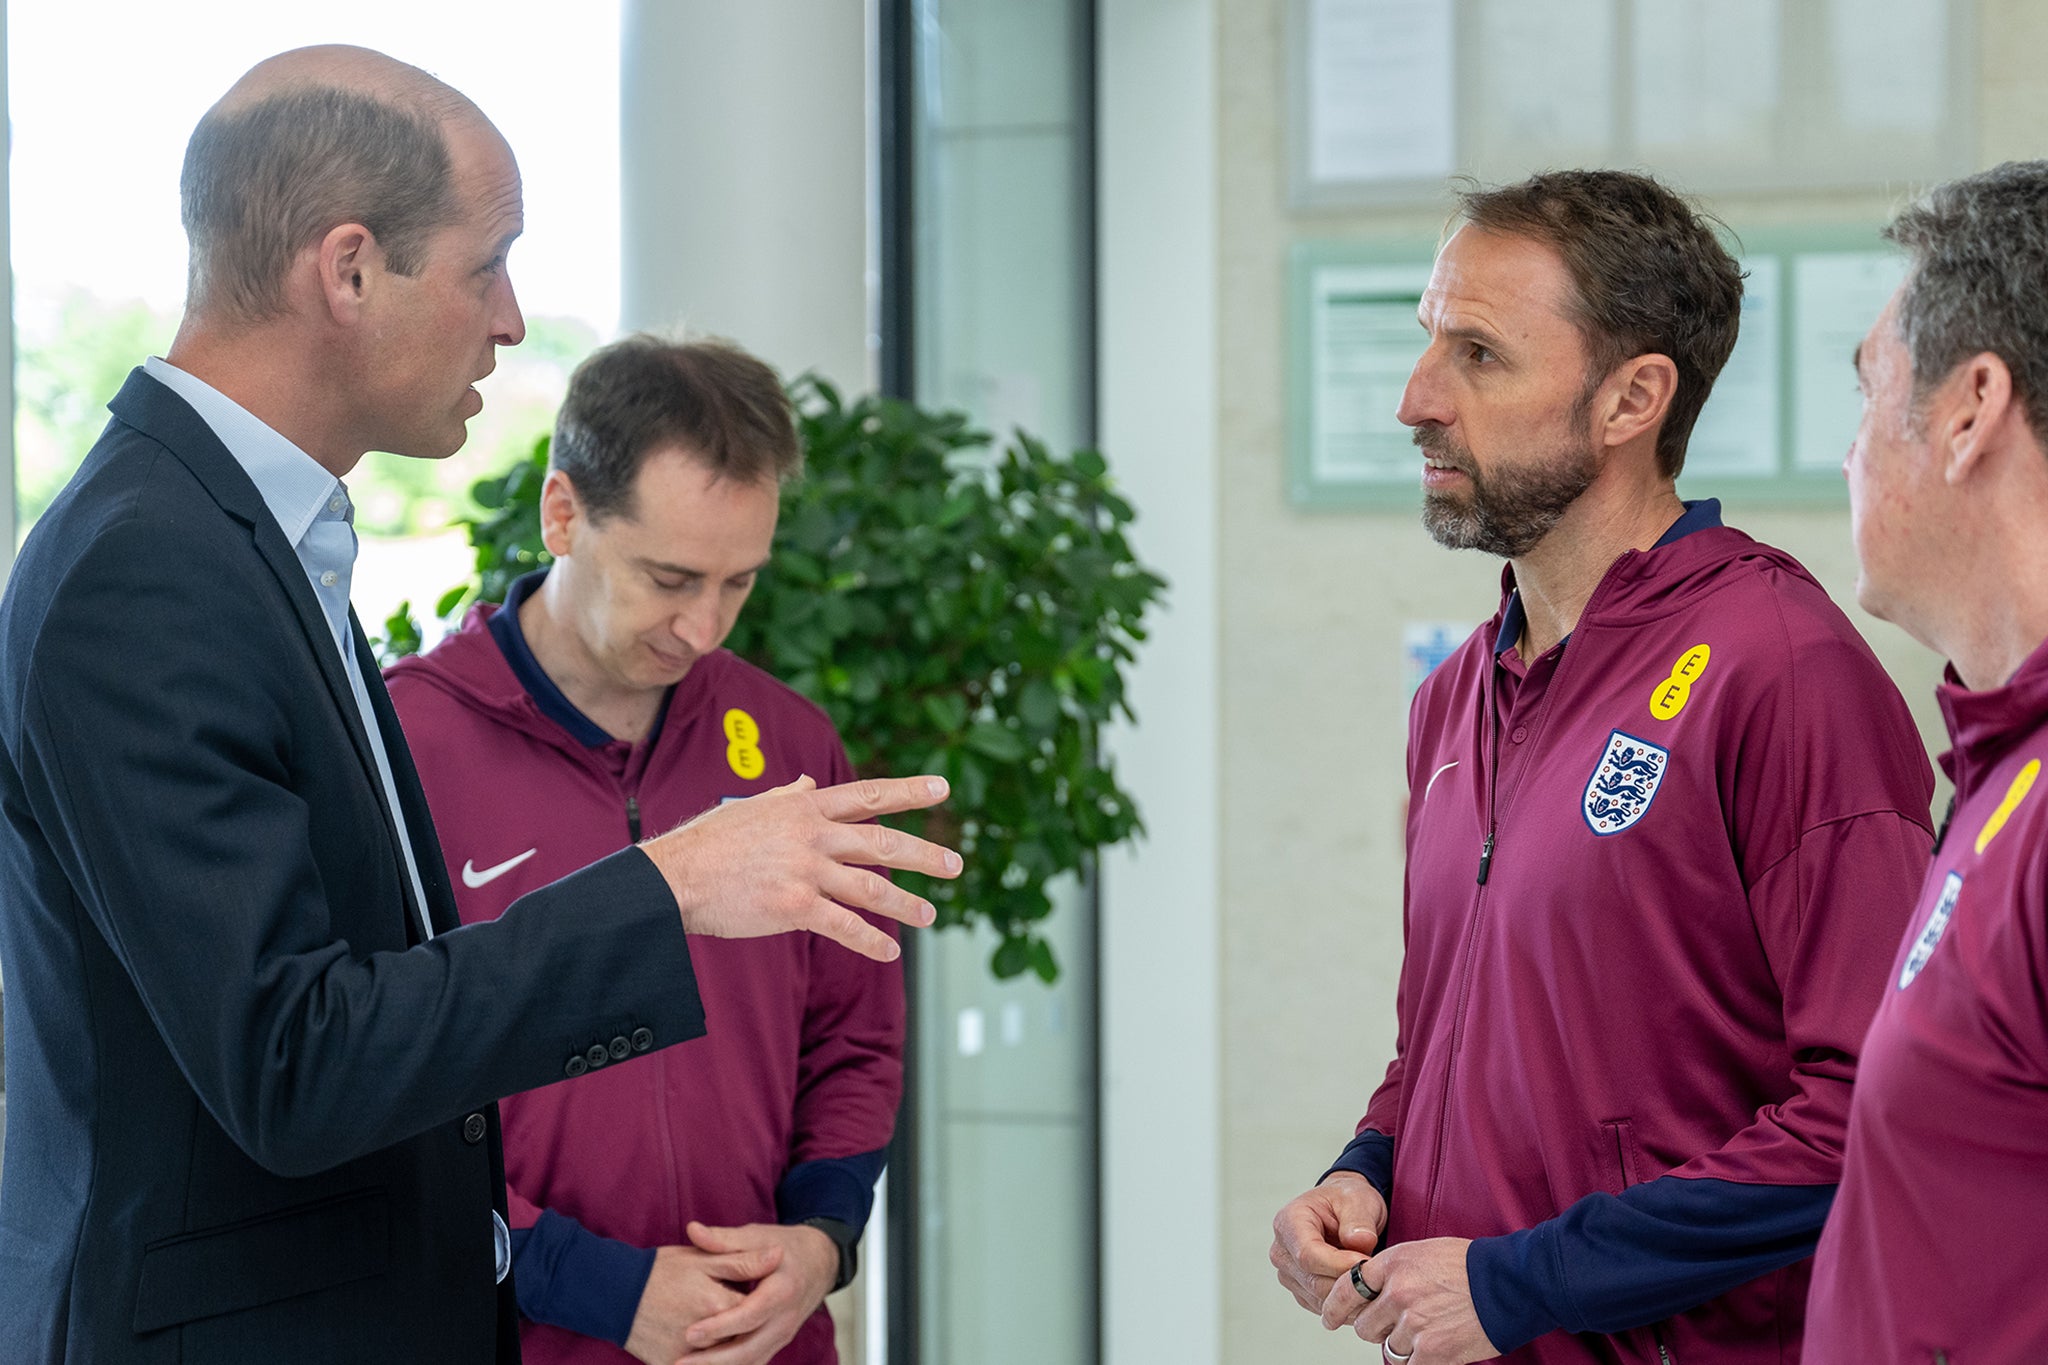 Prince William met the England national team ahead of this year's European Championships